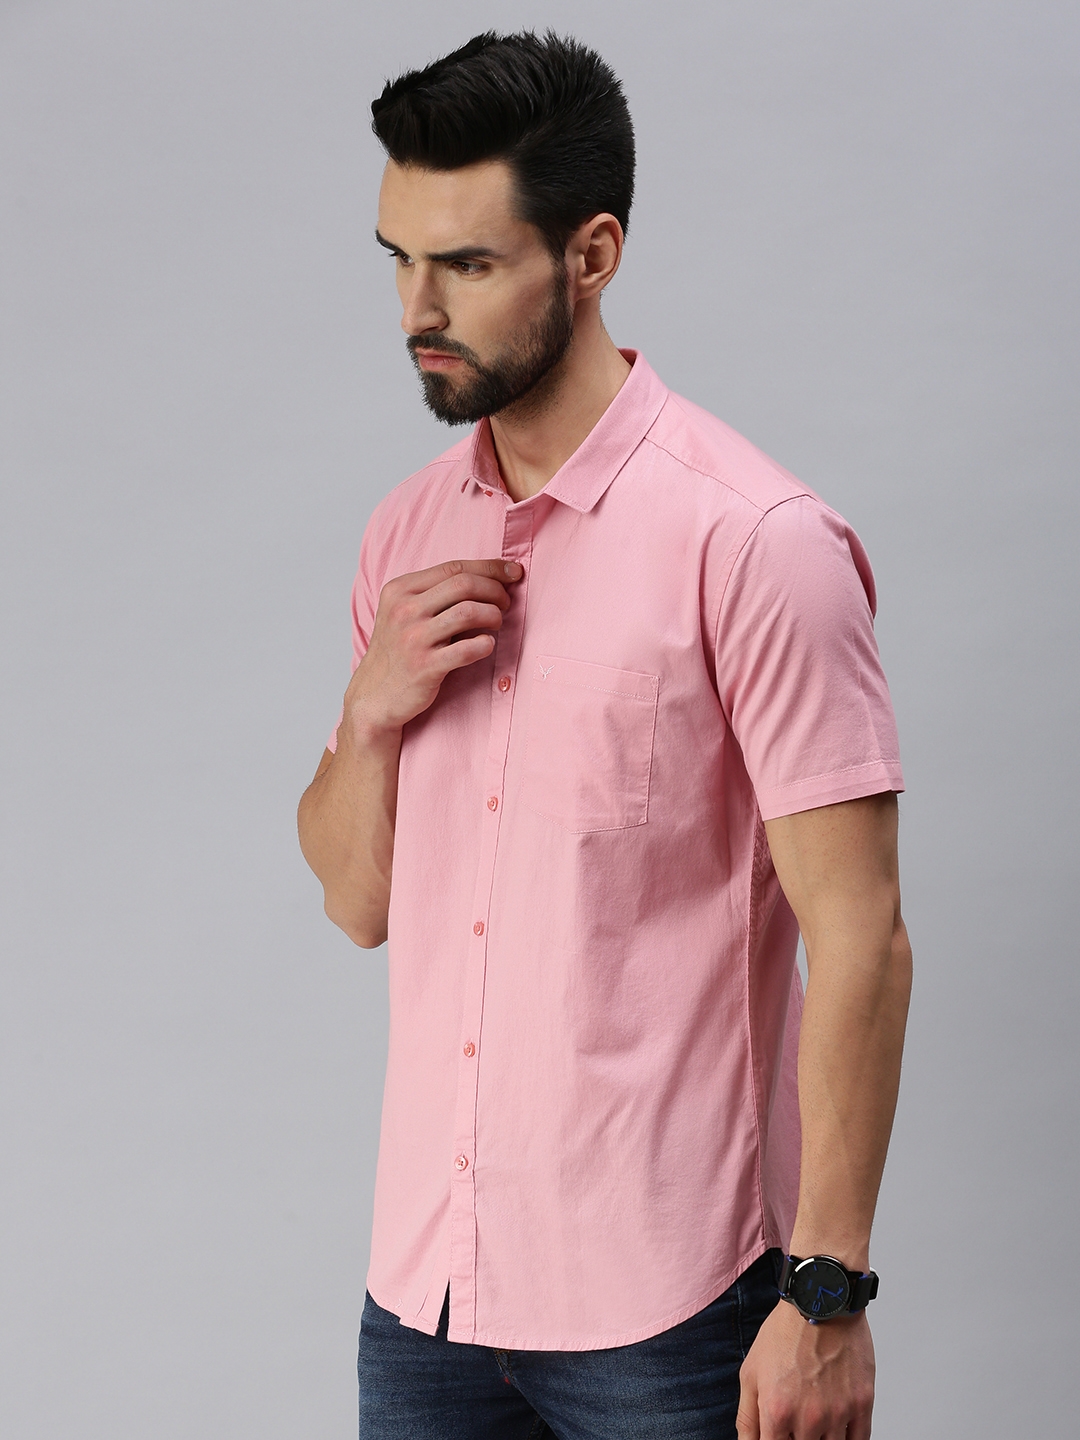 Men's Pink Polycotton Solid Casual Shirts